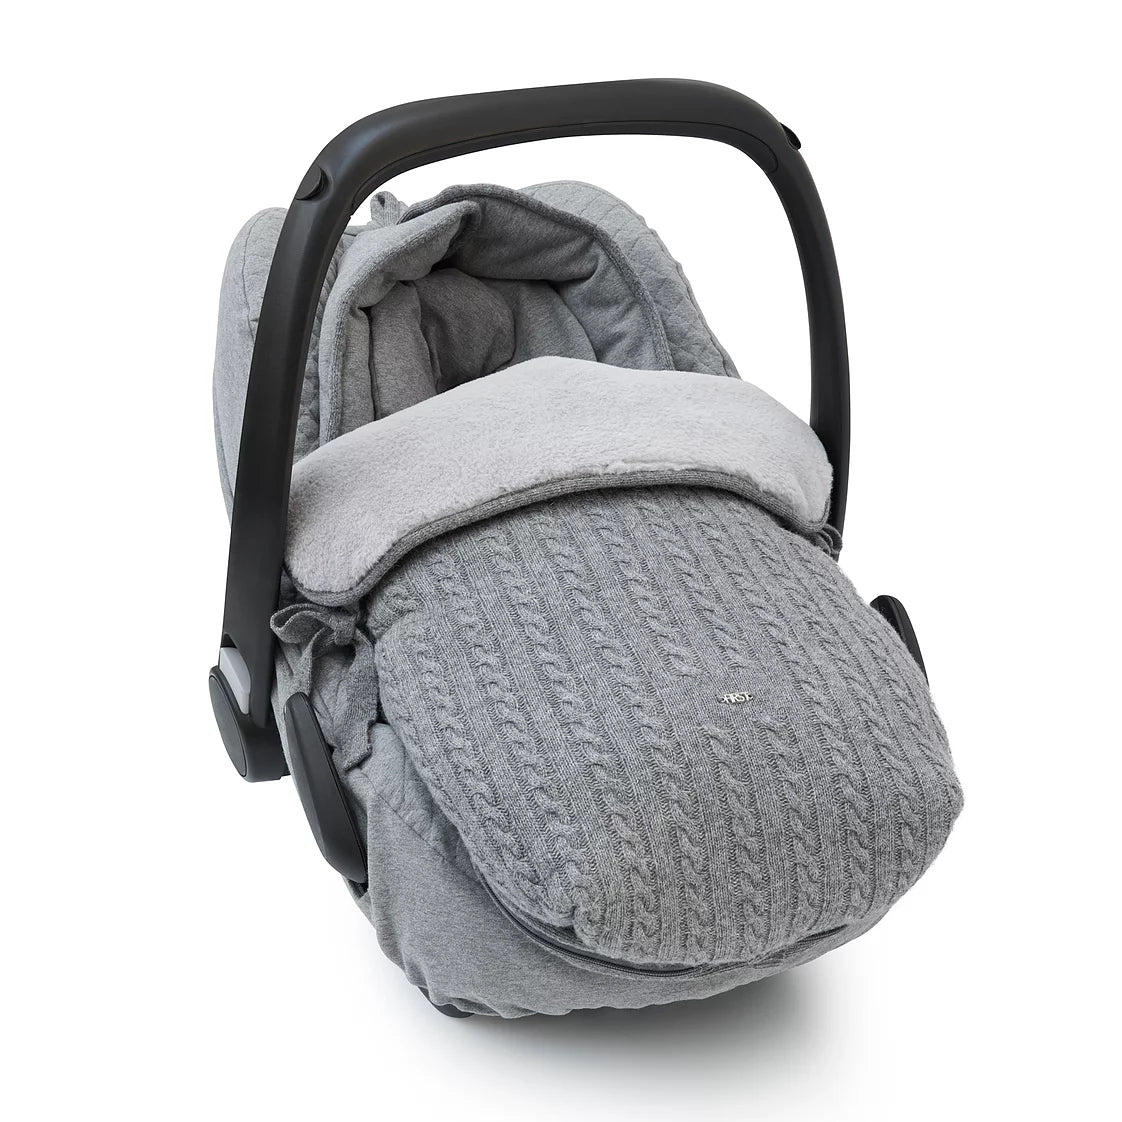 First Endless Grey Angels Nest for Car Seat - Grey Knitted